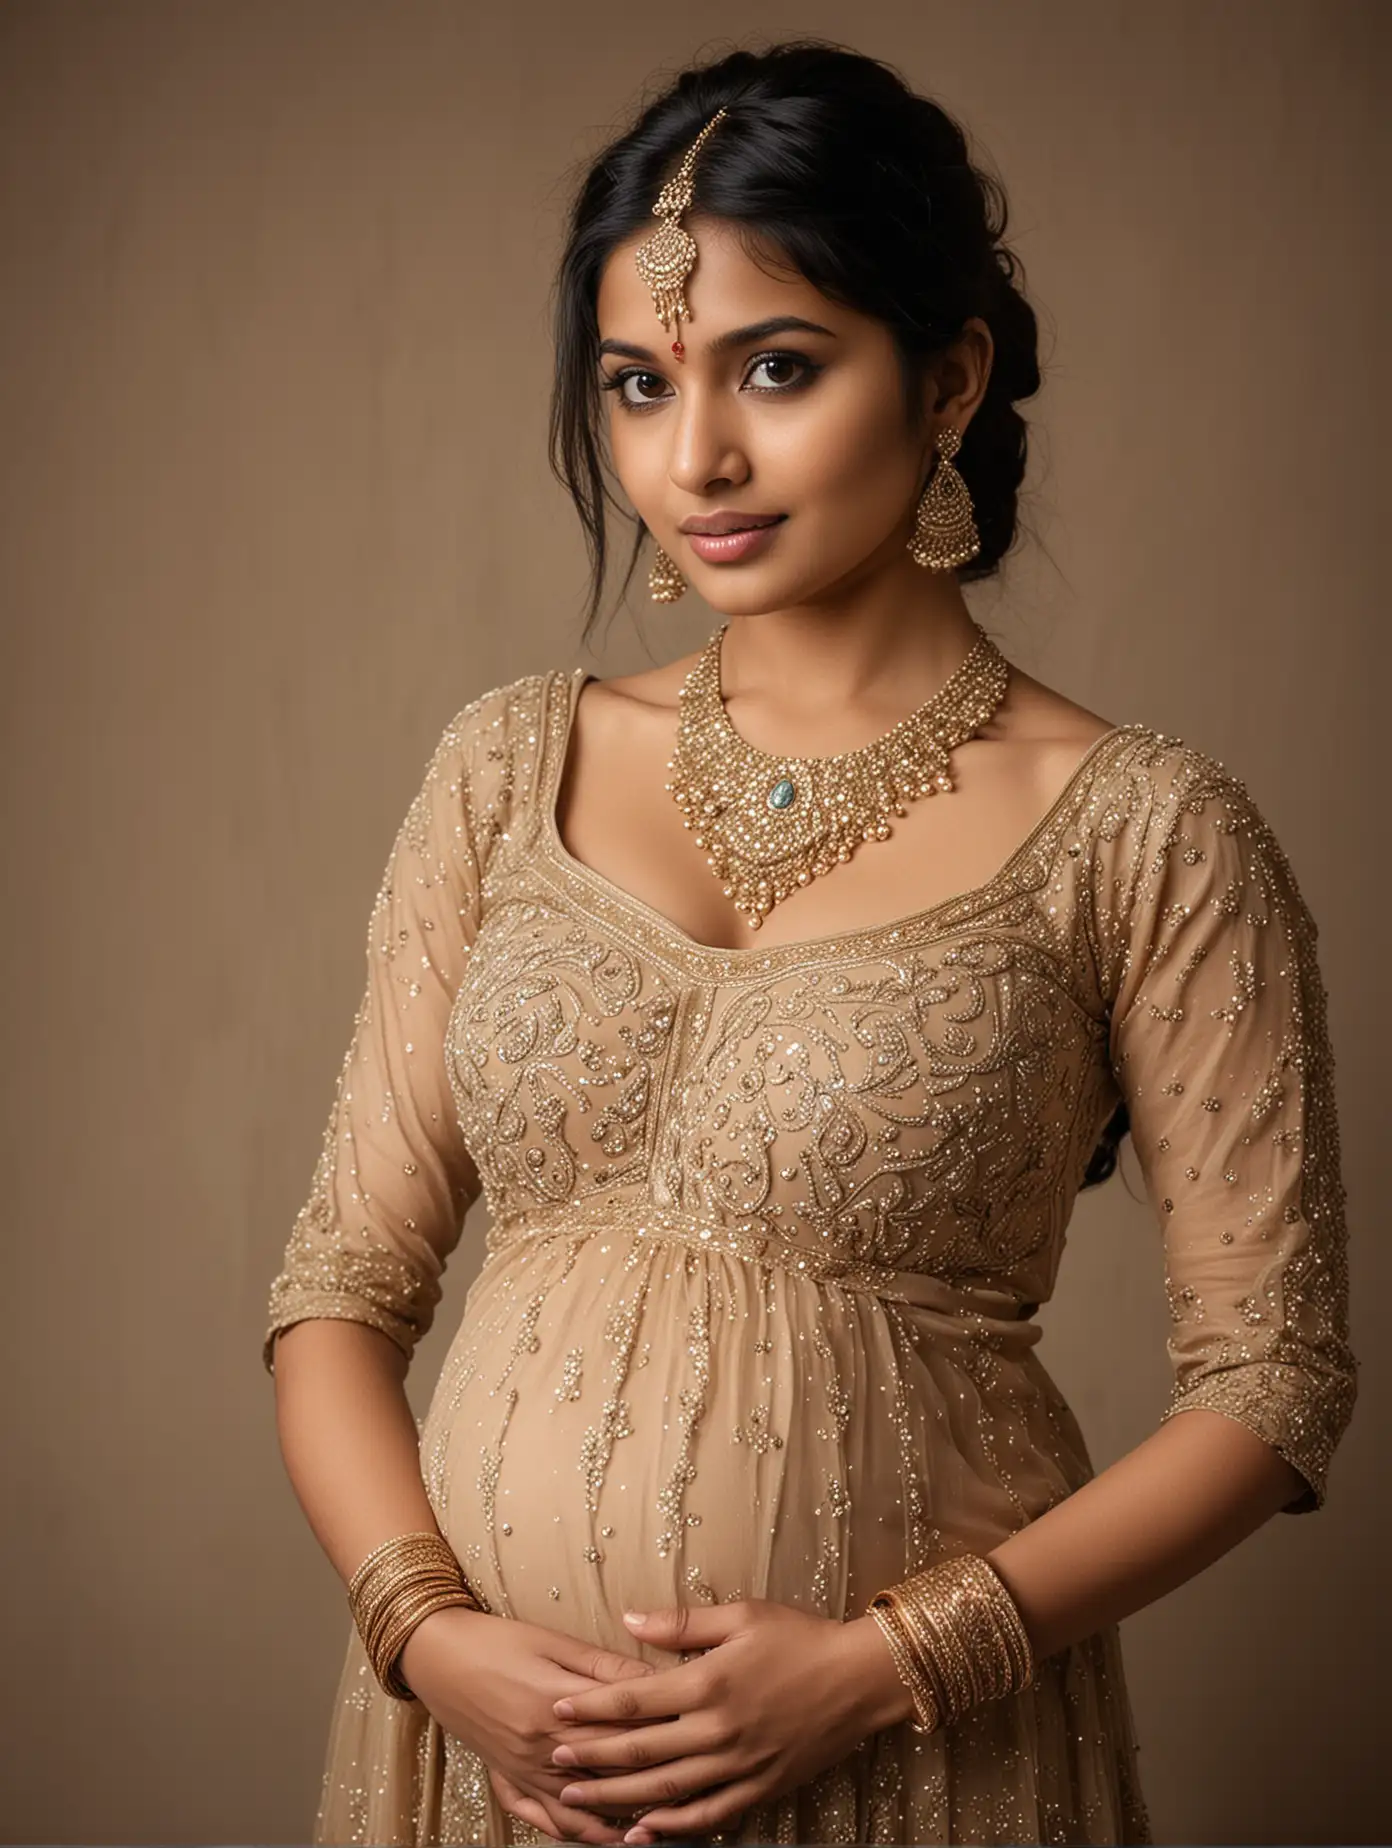 Sexy Indian girl, high sex, pregnant, gorgeous dress, noble, facing the camera, exquisite facial features, professional photography